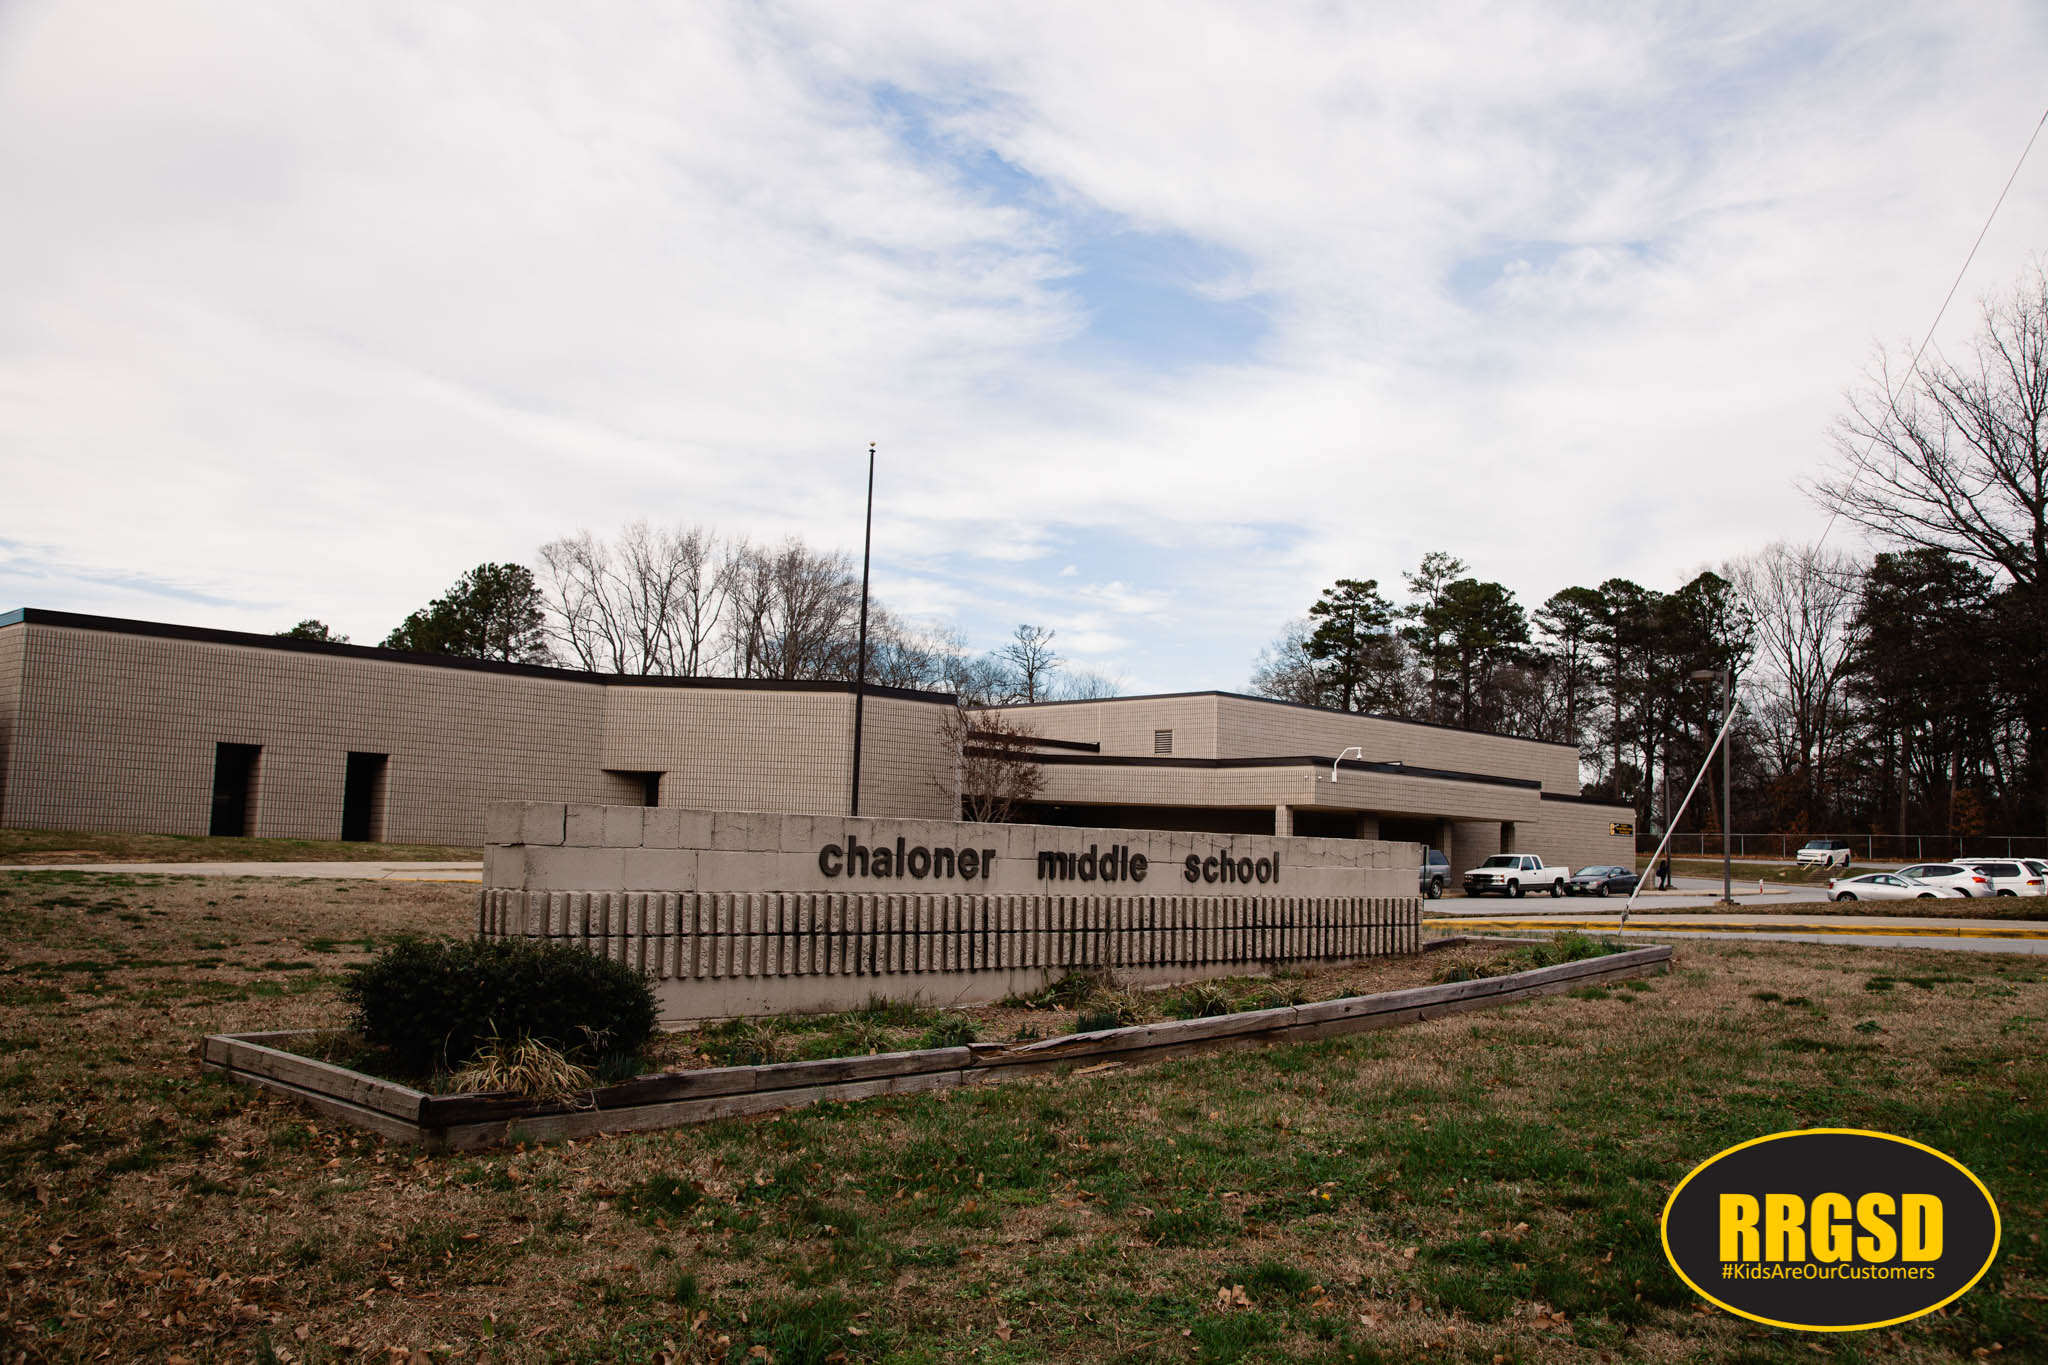 Roanoke Rapids Graded School District | Where Kids Are Our Customers